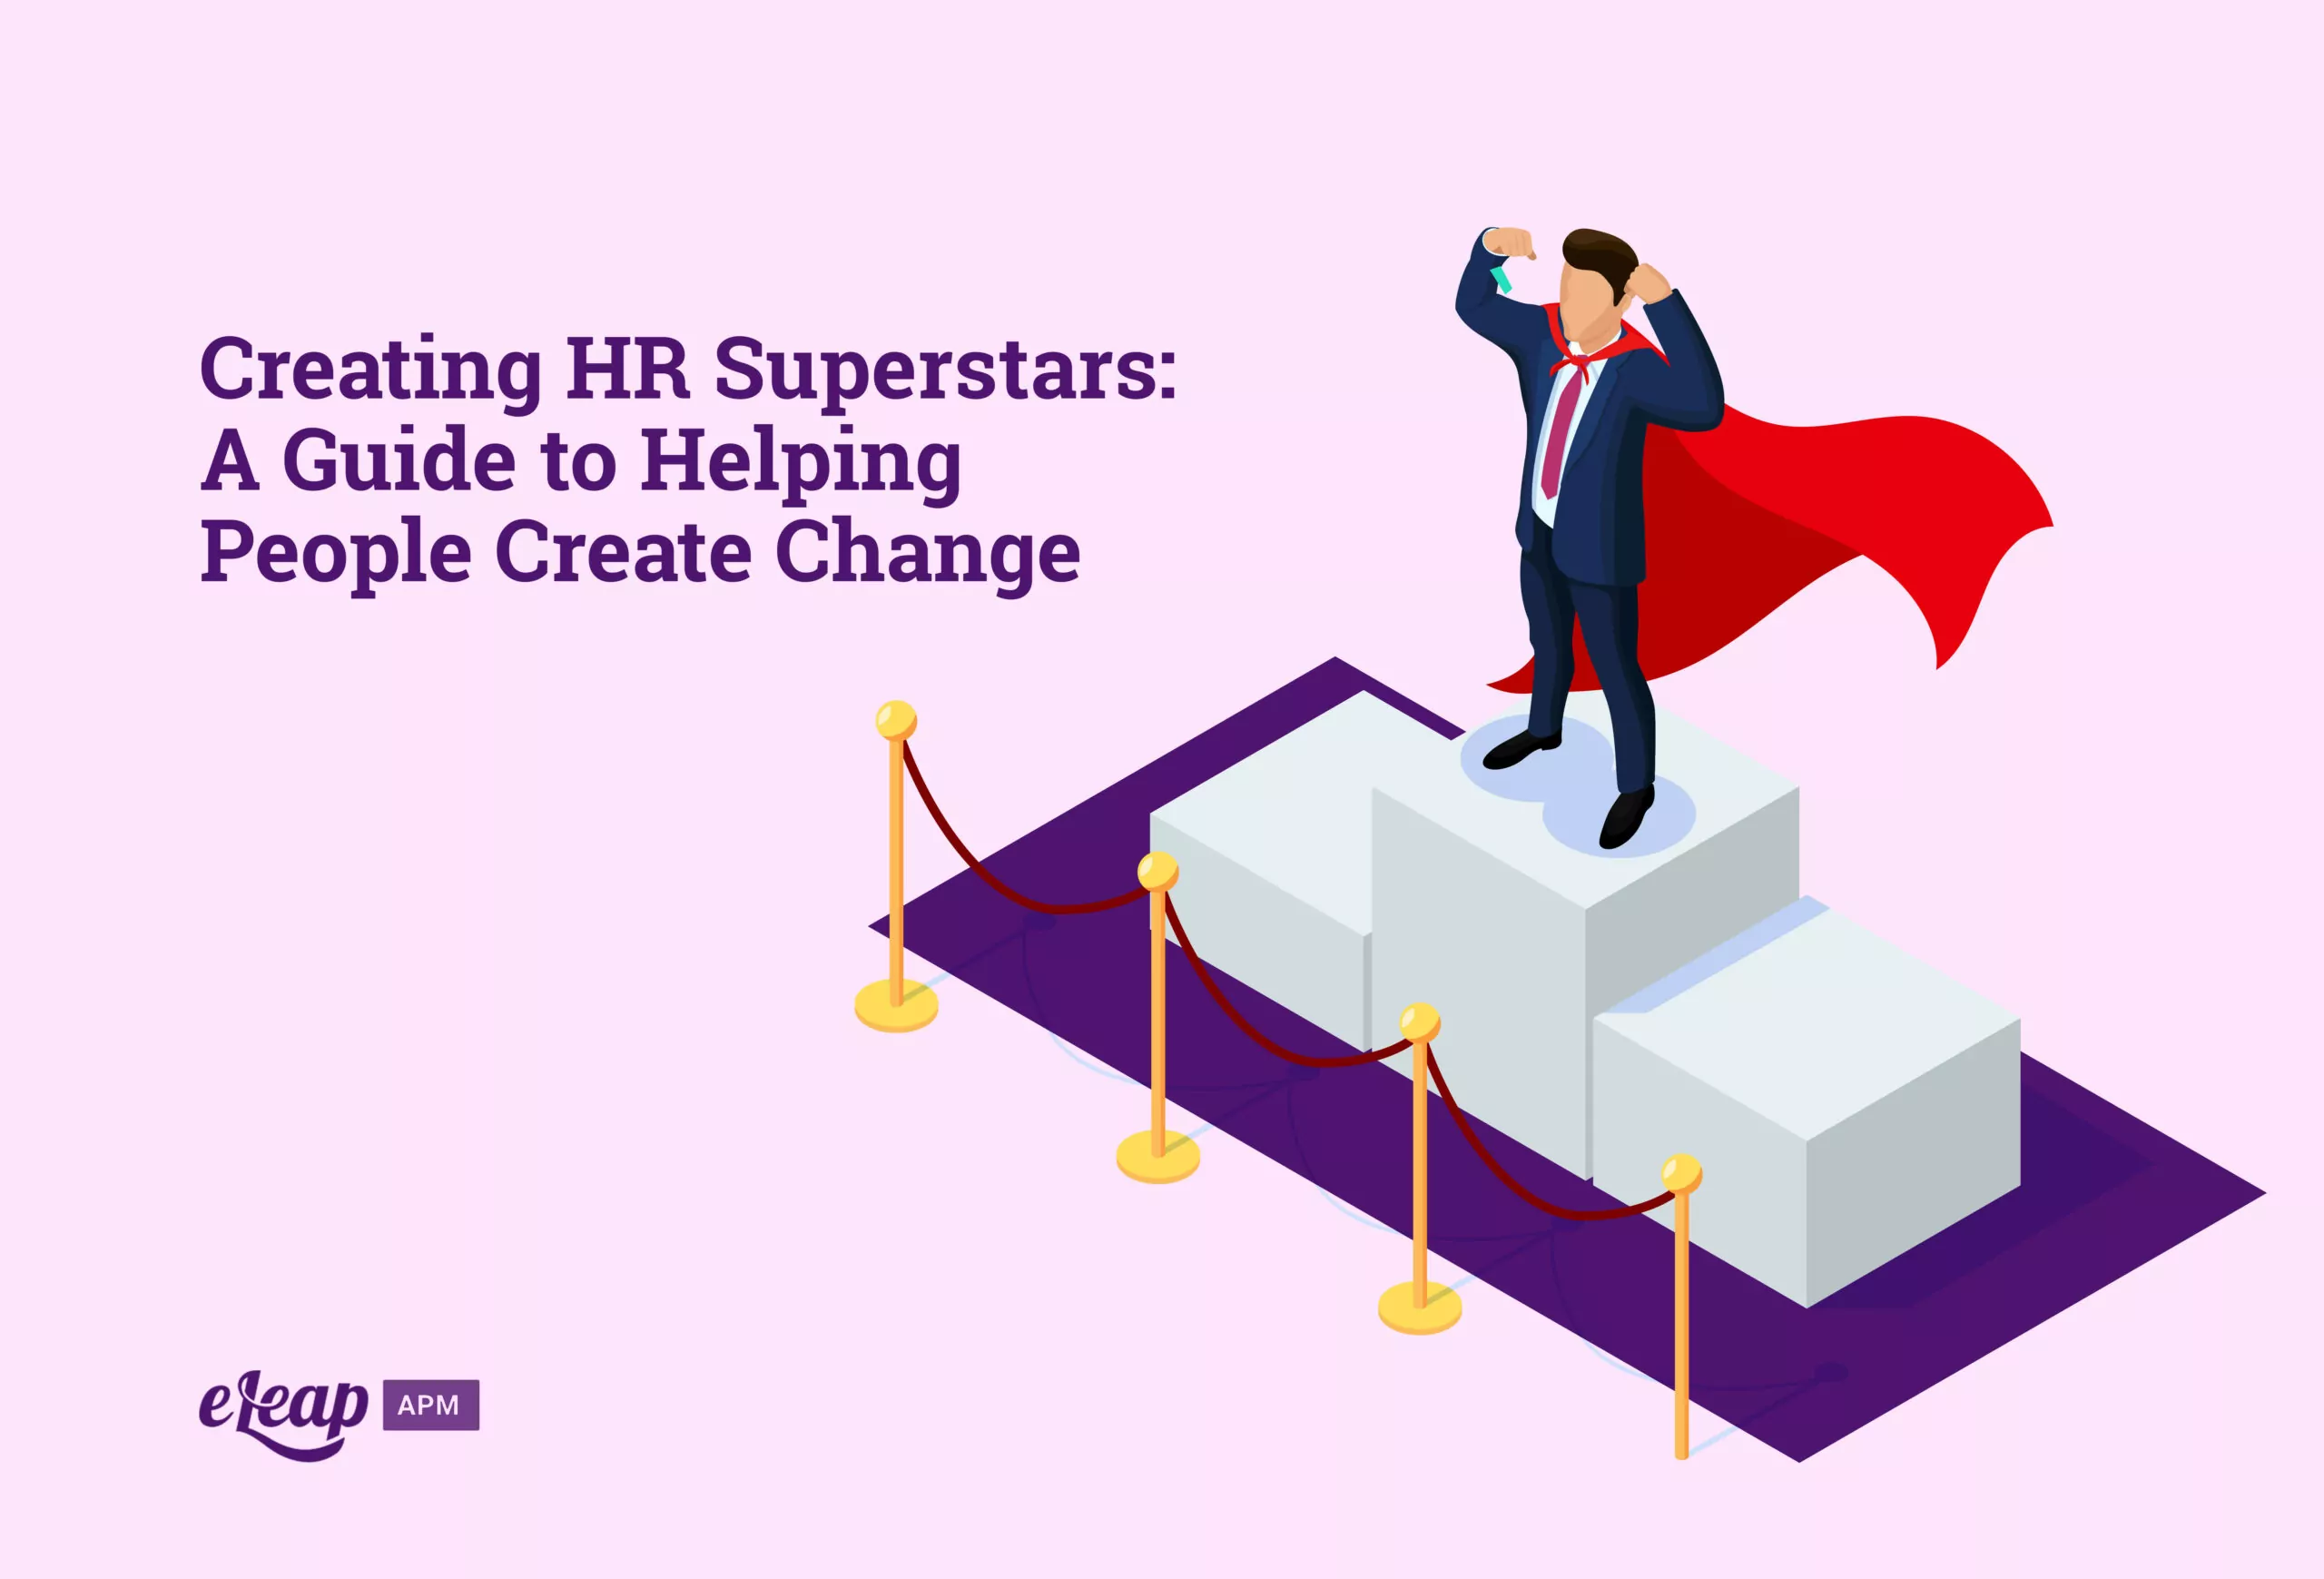 Creating HR Superstars: A Guide to Helping People Create Change